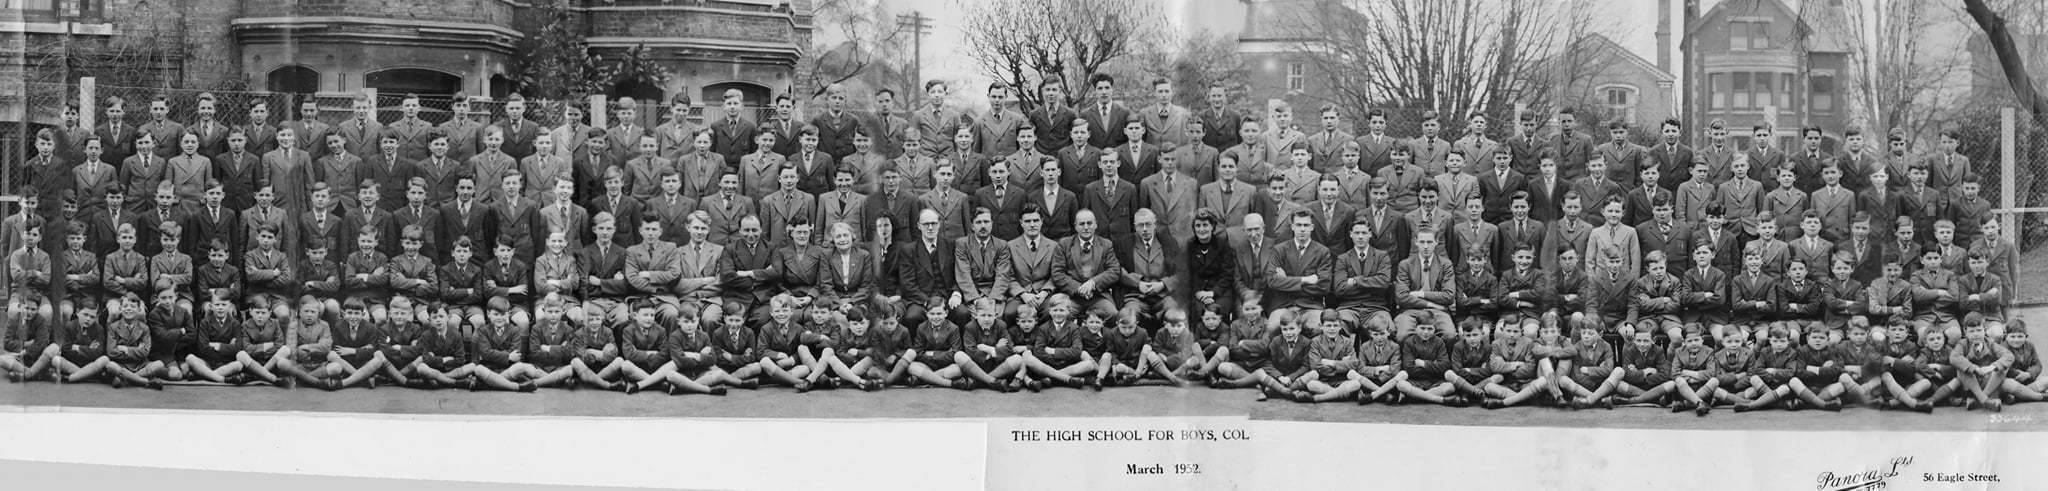 Smart - pupils at Colchester Boys High School in 1952